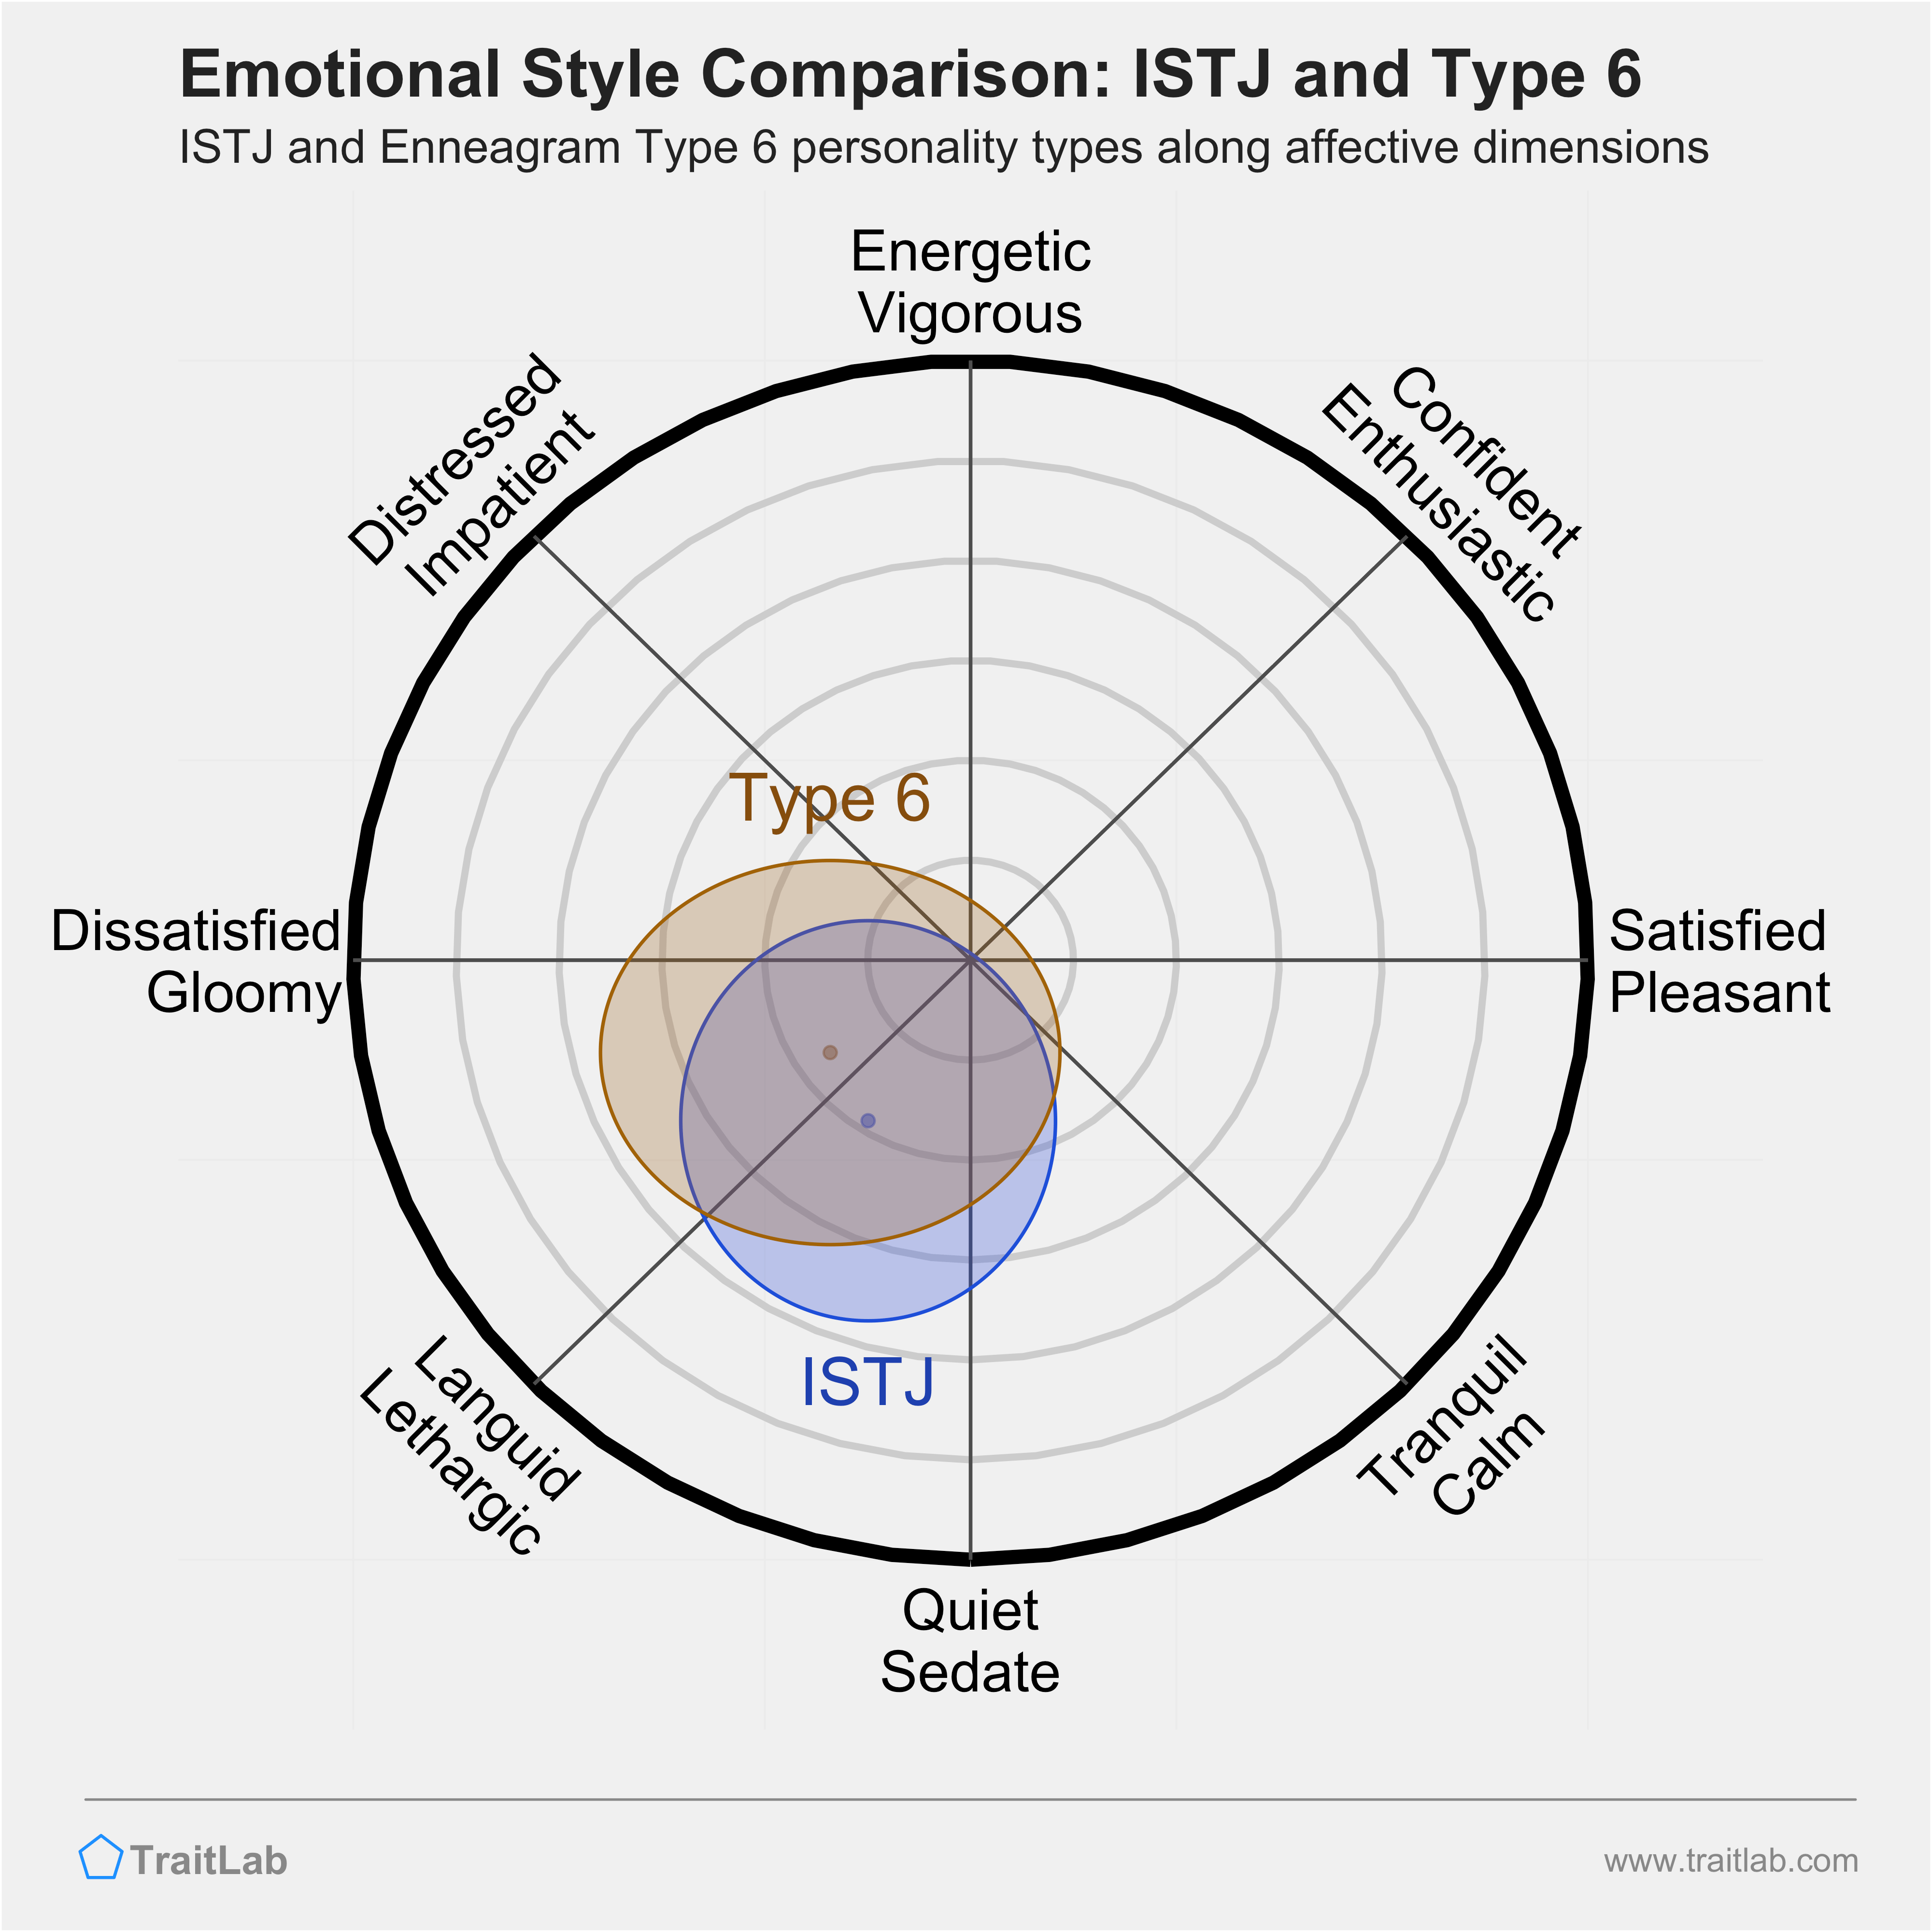 ISTJ and Type 6 comparison across emotional (affective) dimensions